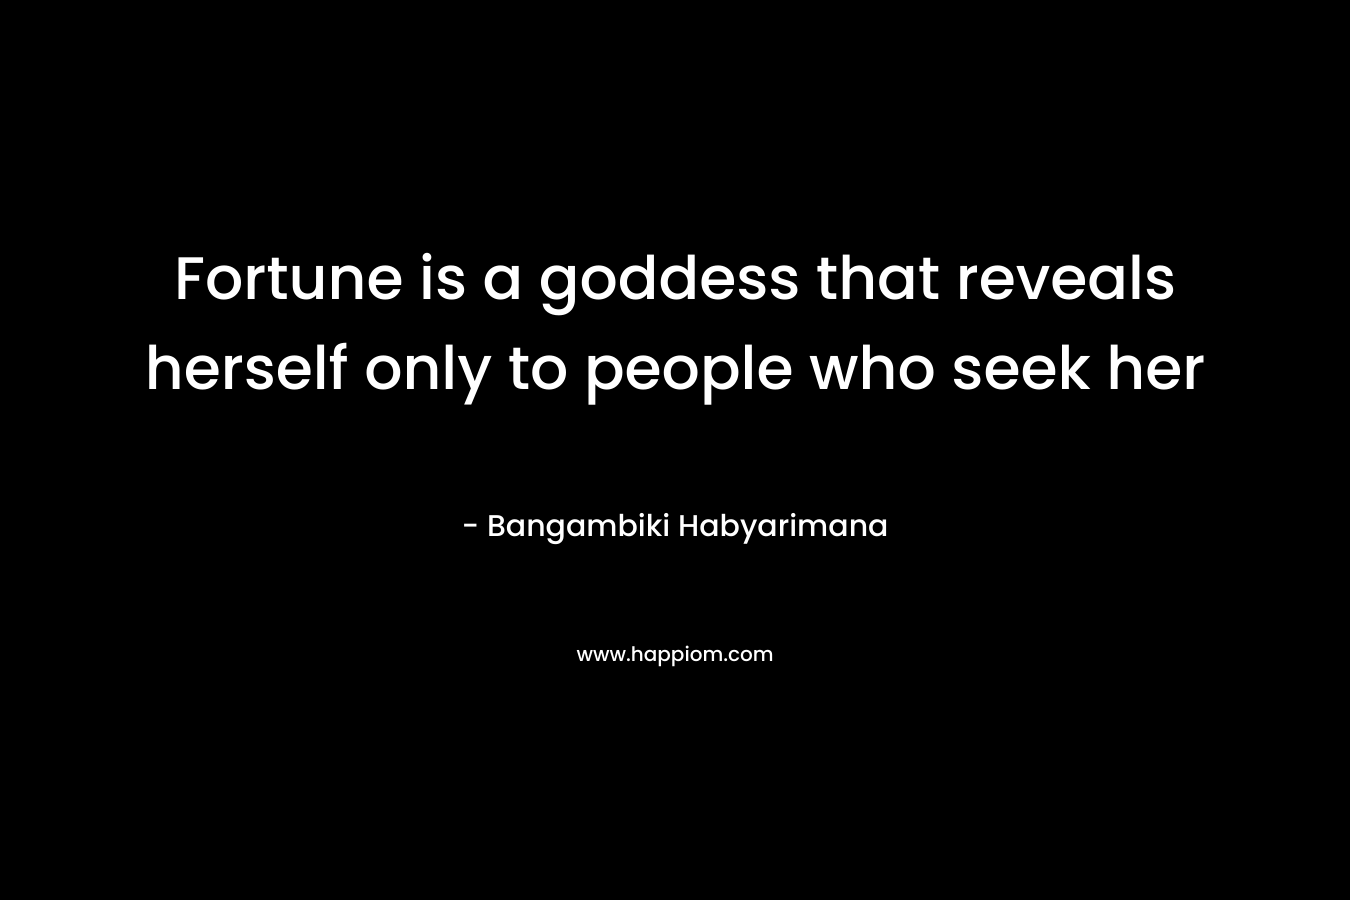 Fortune is a goddess that reveals herself only to people who seek her